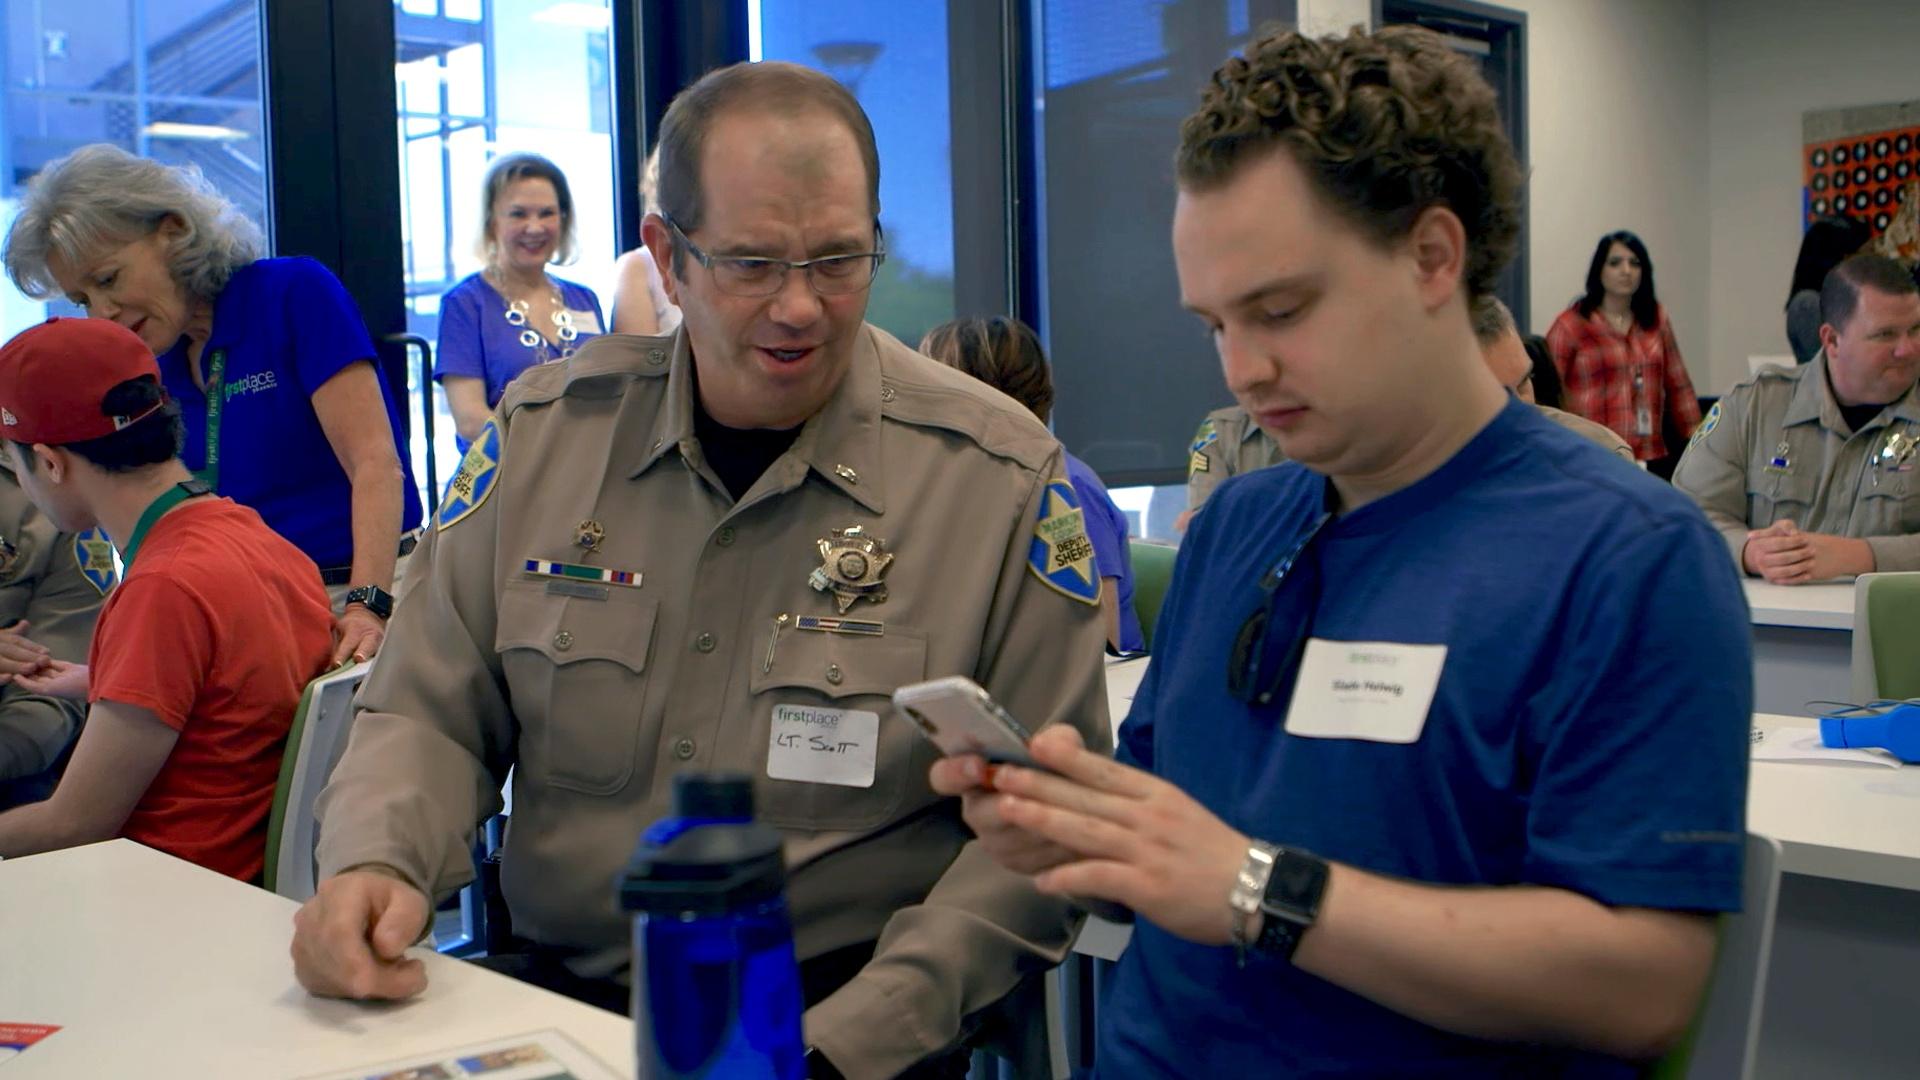 A  law enforcement officer meets Slade, a young man with autism. 